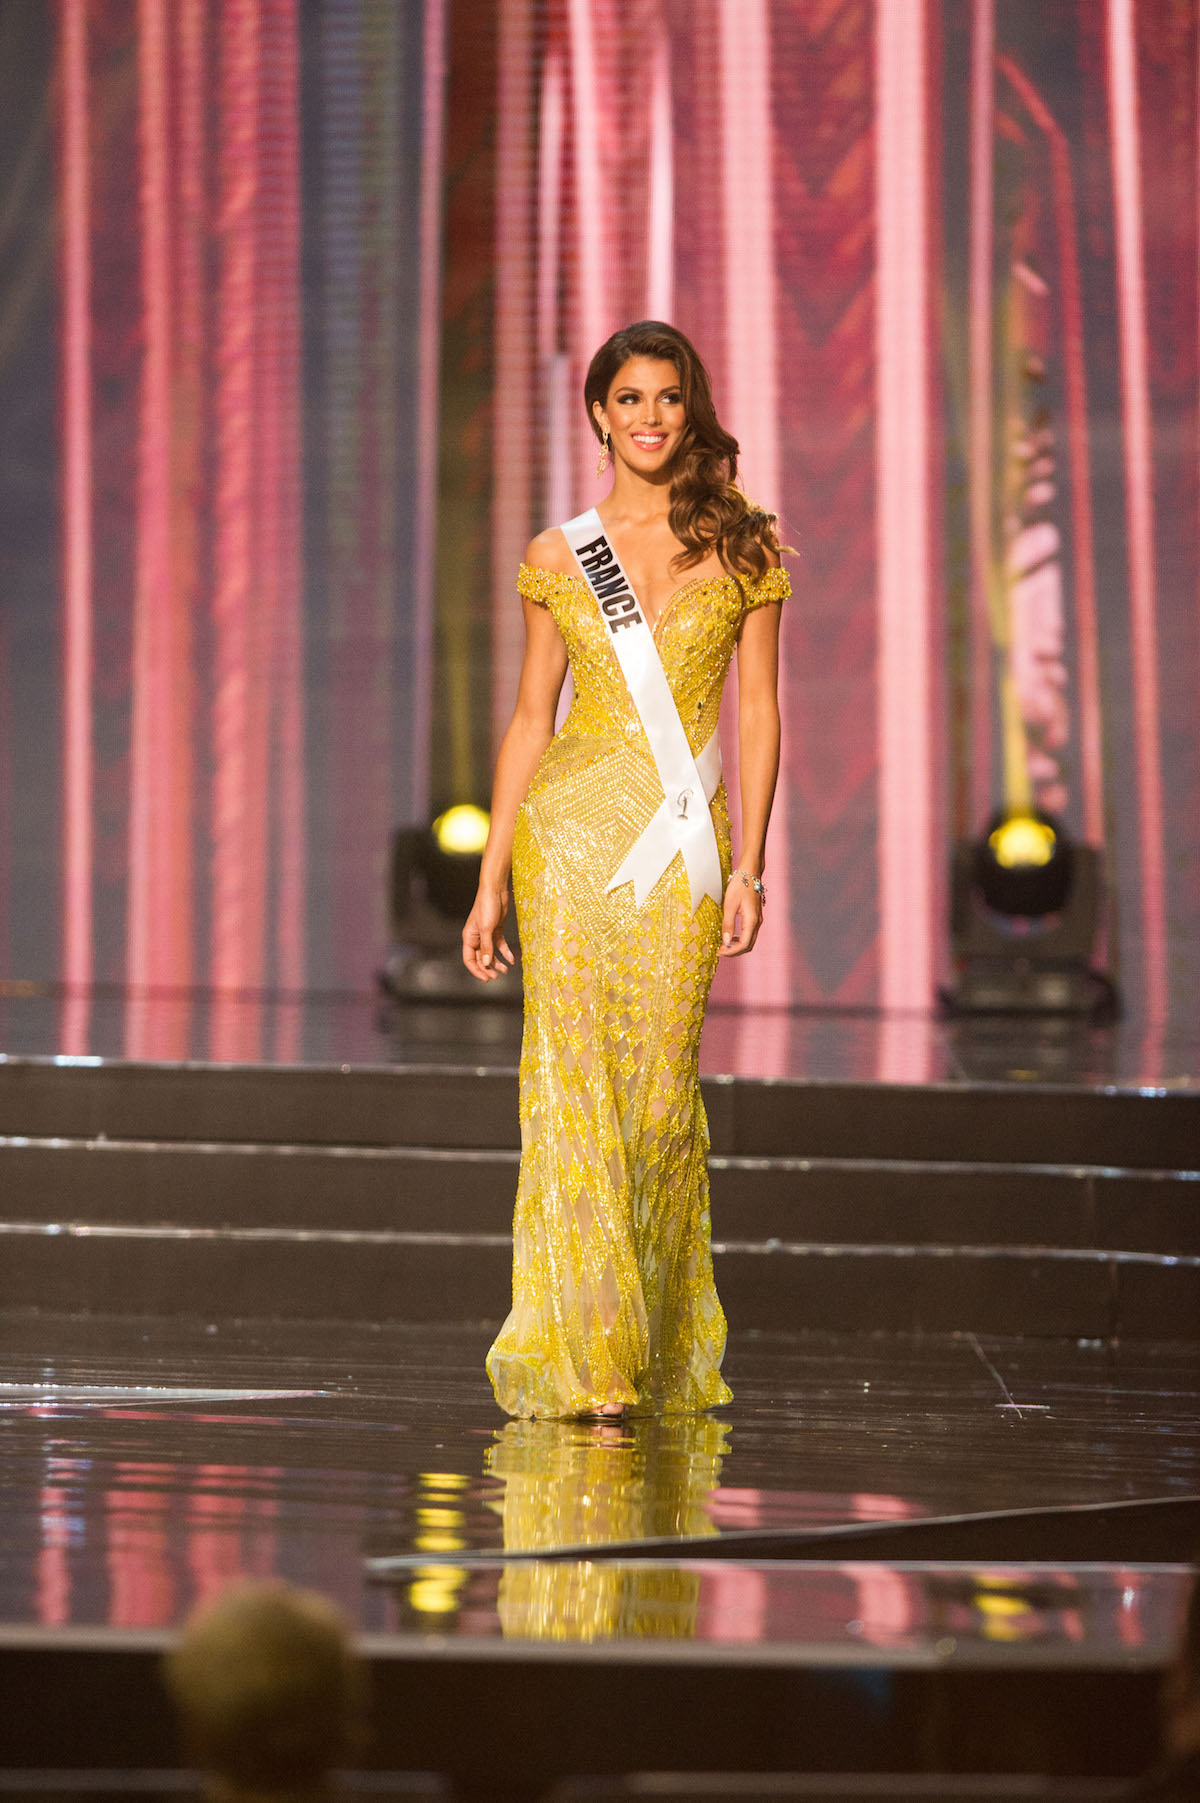 65th Miss Universe Competition